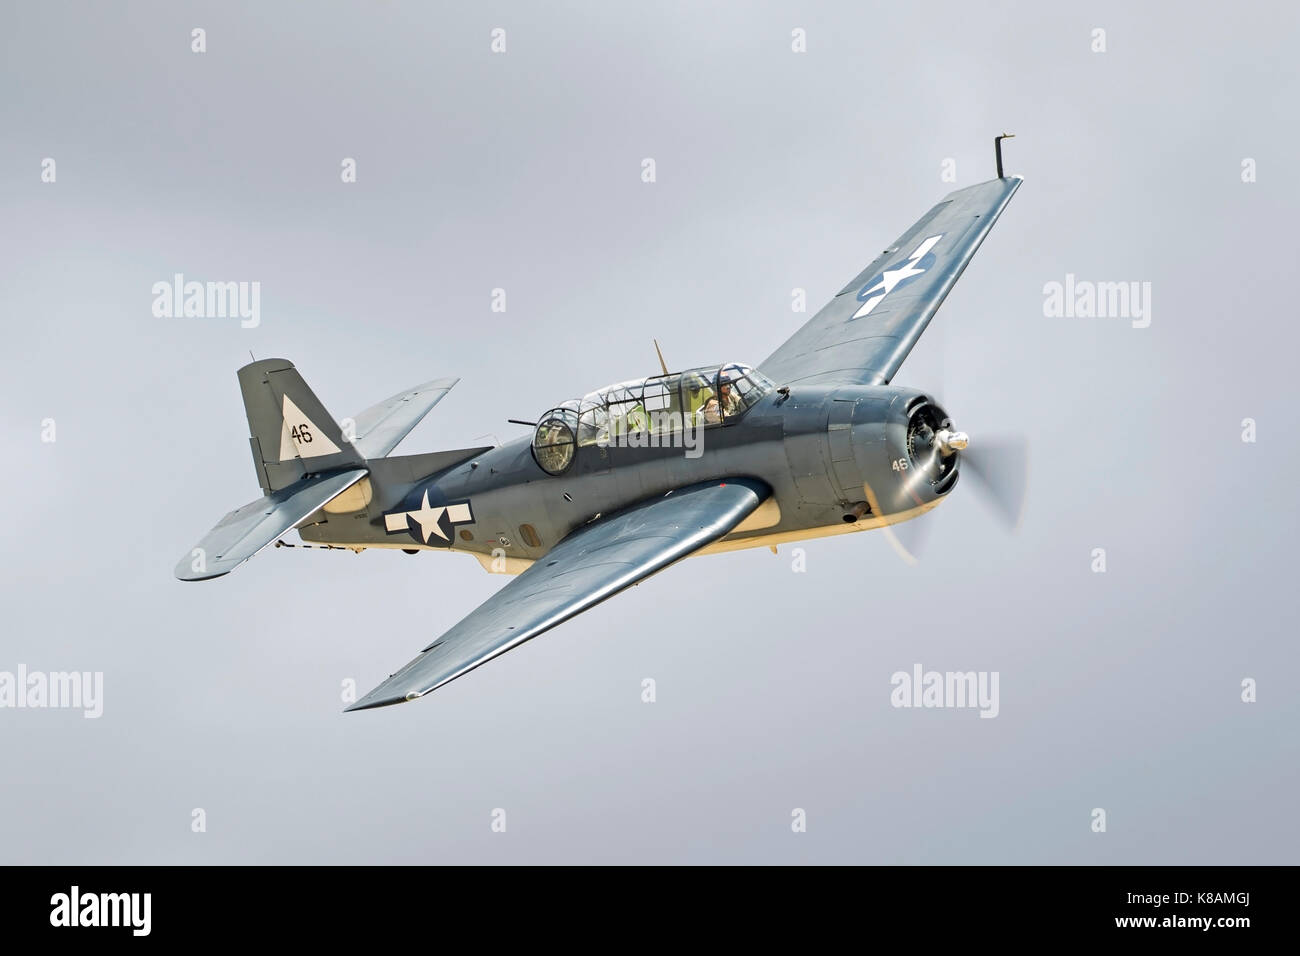 Airplane TBM Avenger WWII dive bomber flying at the airshow Stock Photo